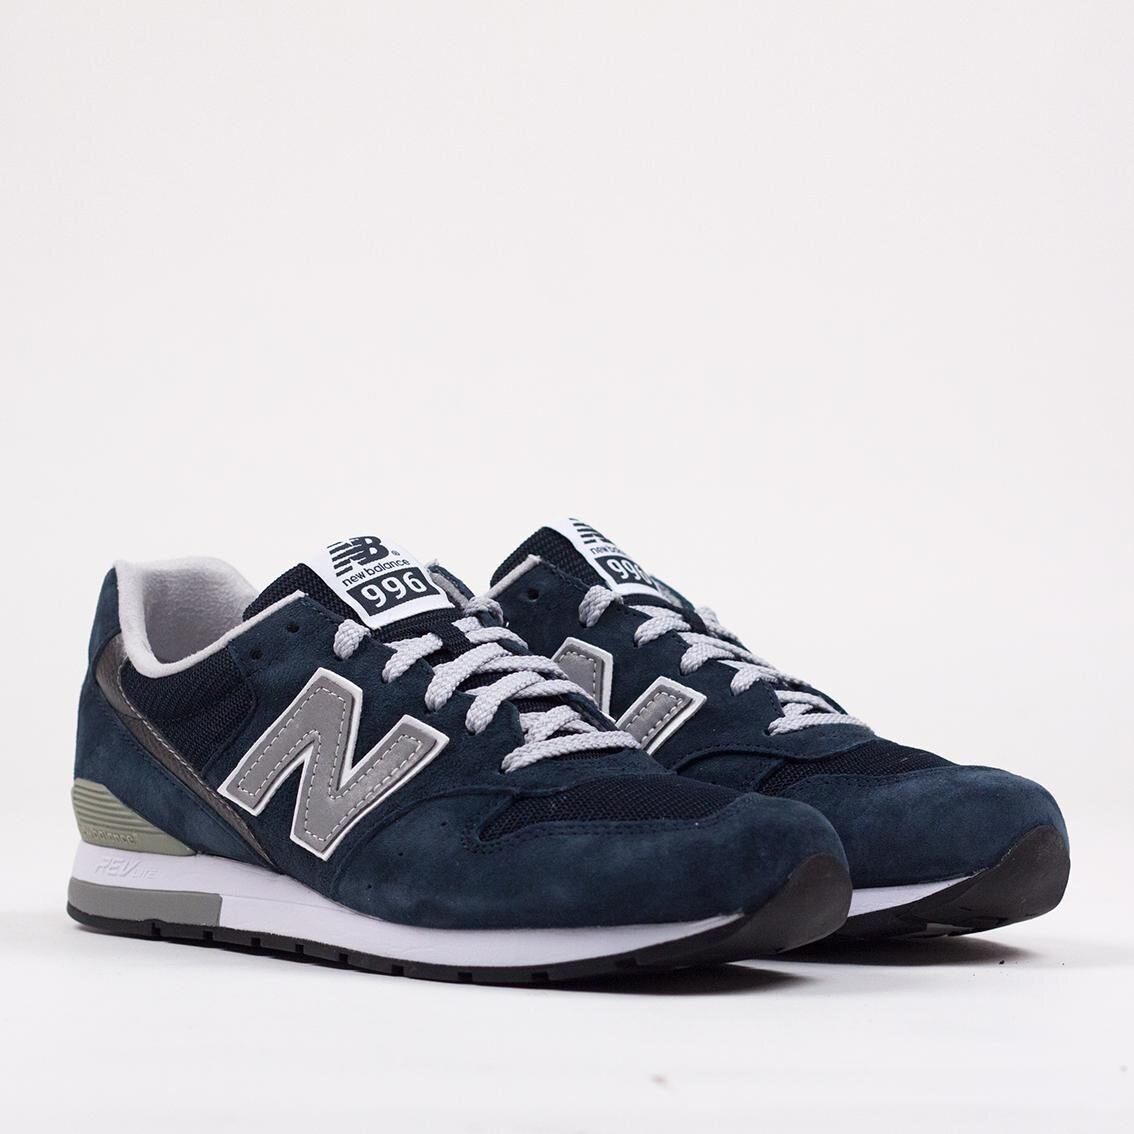 New Balance M996 Shoes in Navy.jpg